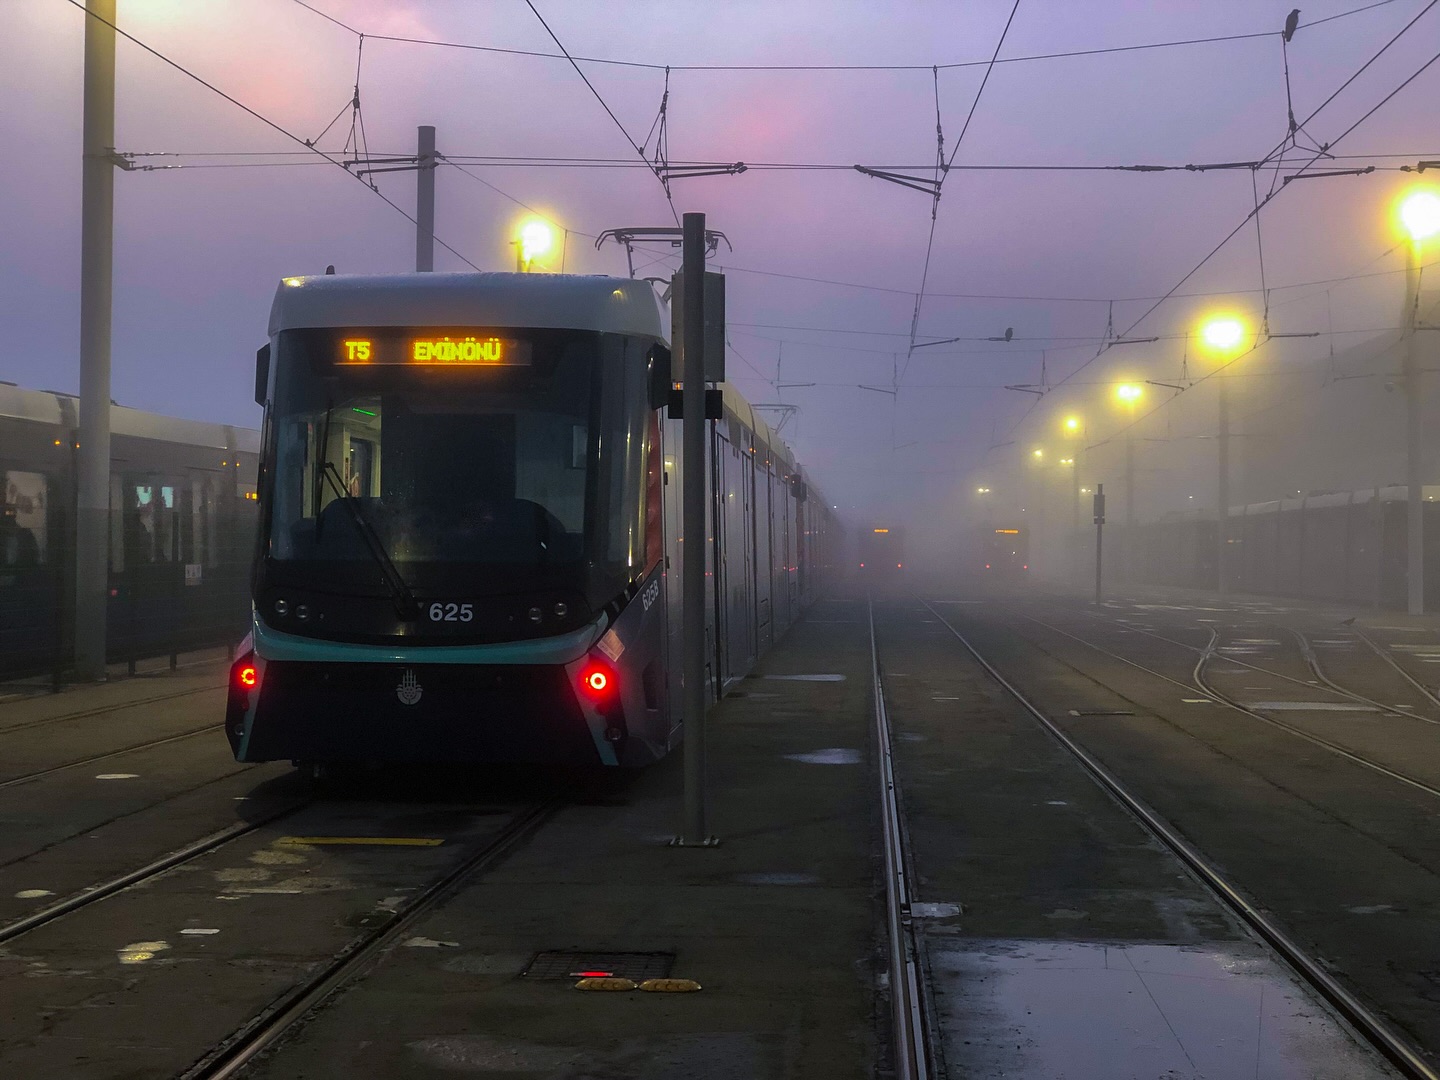 An impressive shot from our T5 Eminönü-Alibeyköy Tram Line in the early hours of the morning.